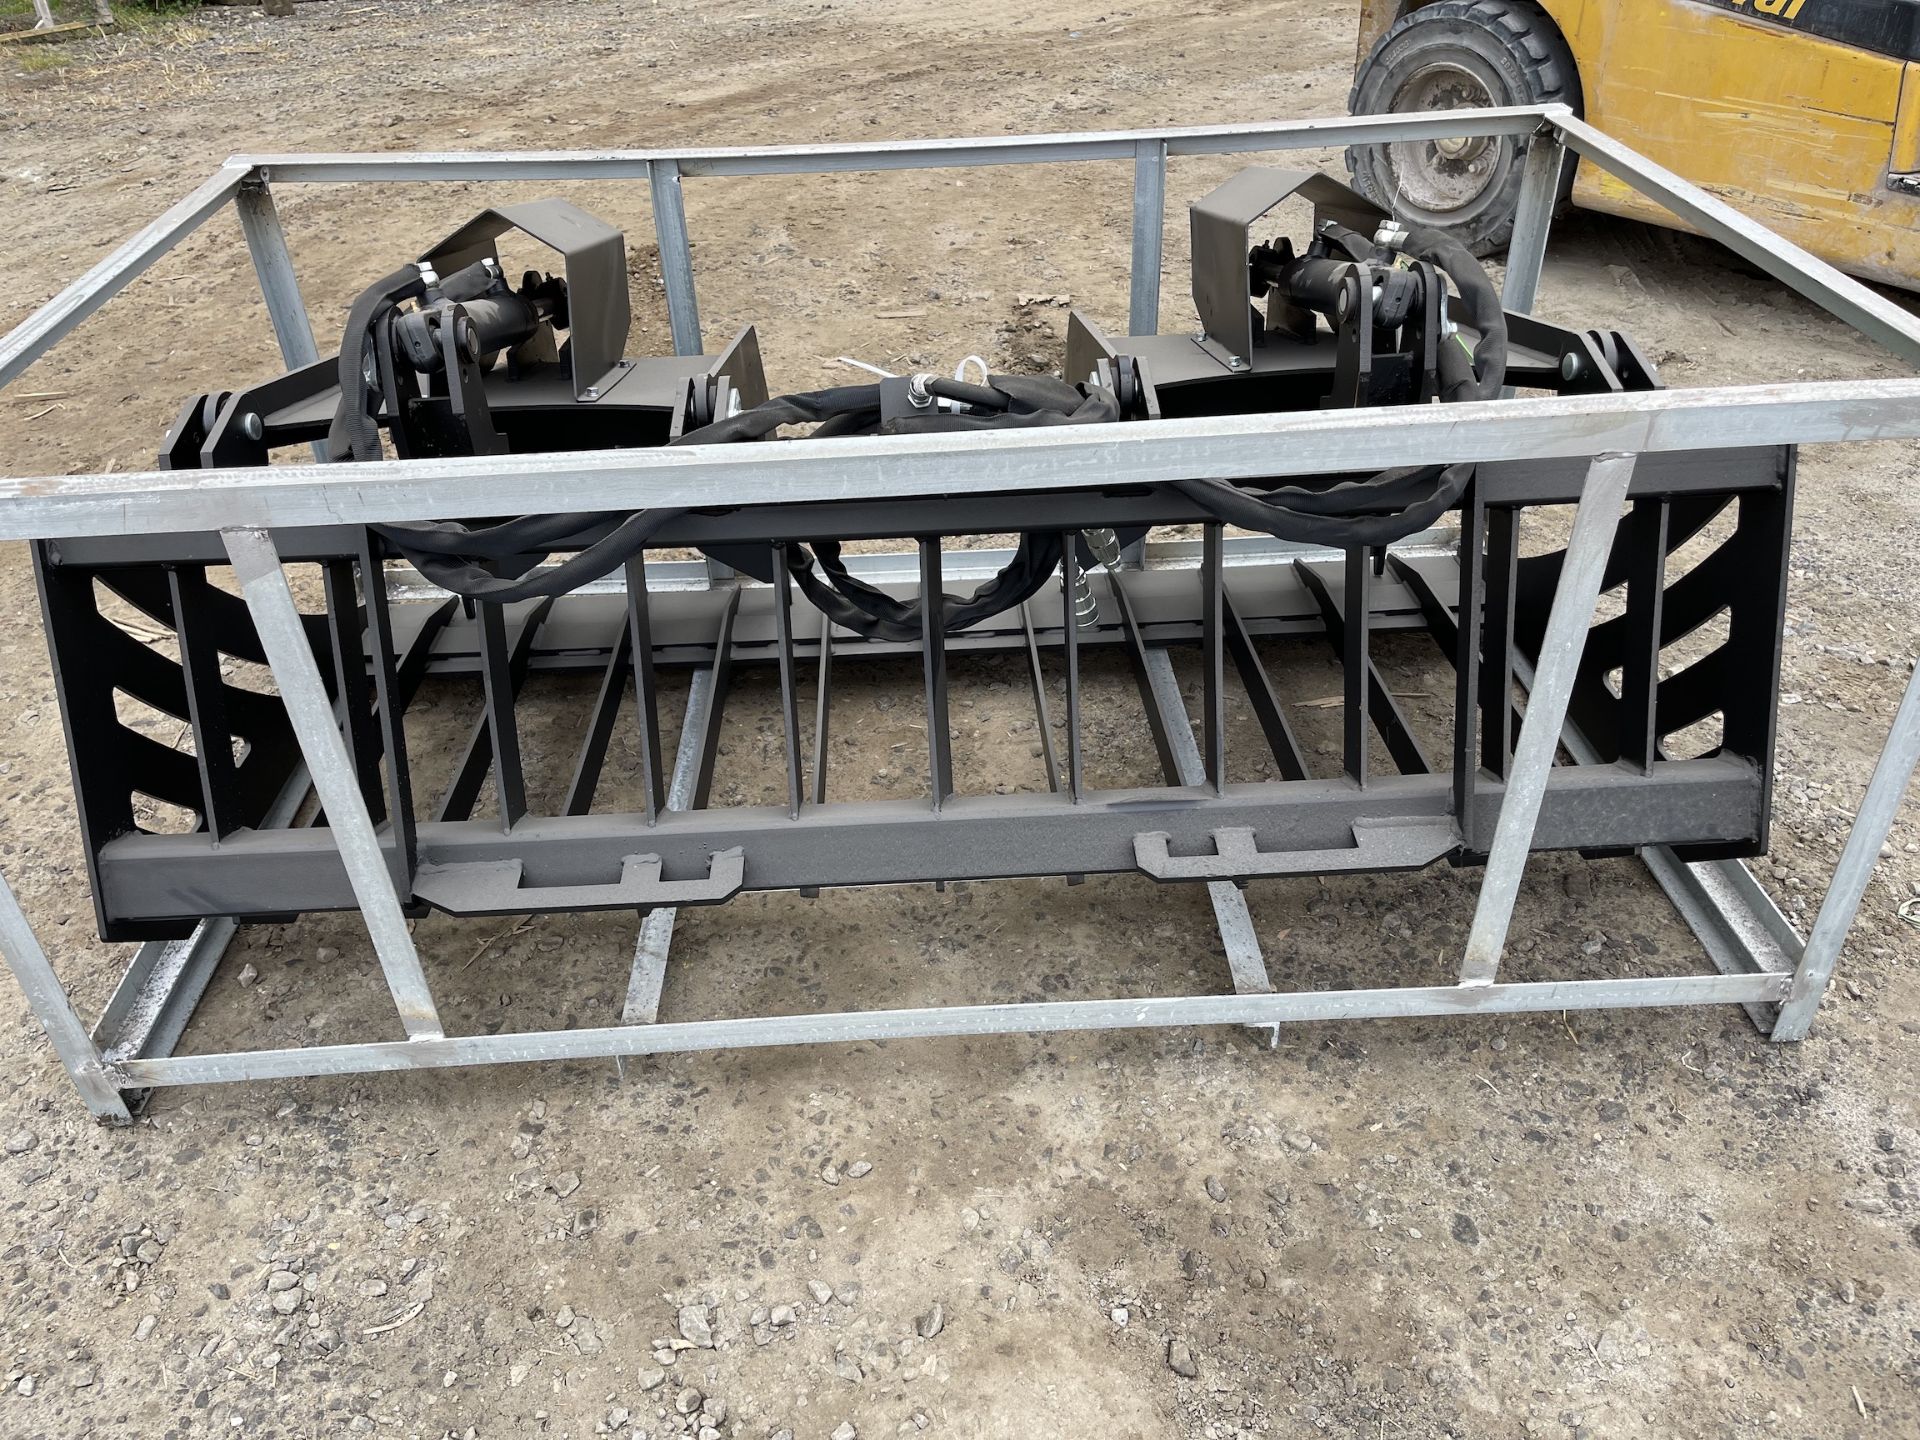 Brand New Greatbear 72" Rock Grapple Bucket Skid Steer Attachment (NY153) - Image 6 of 12